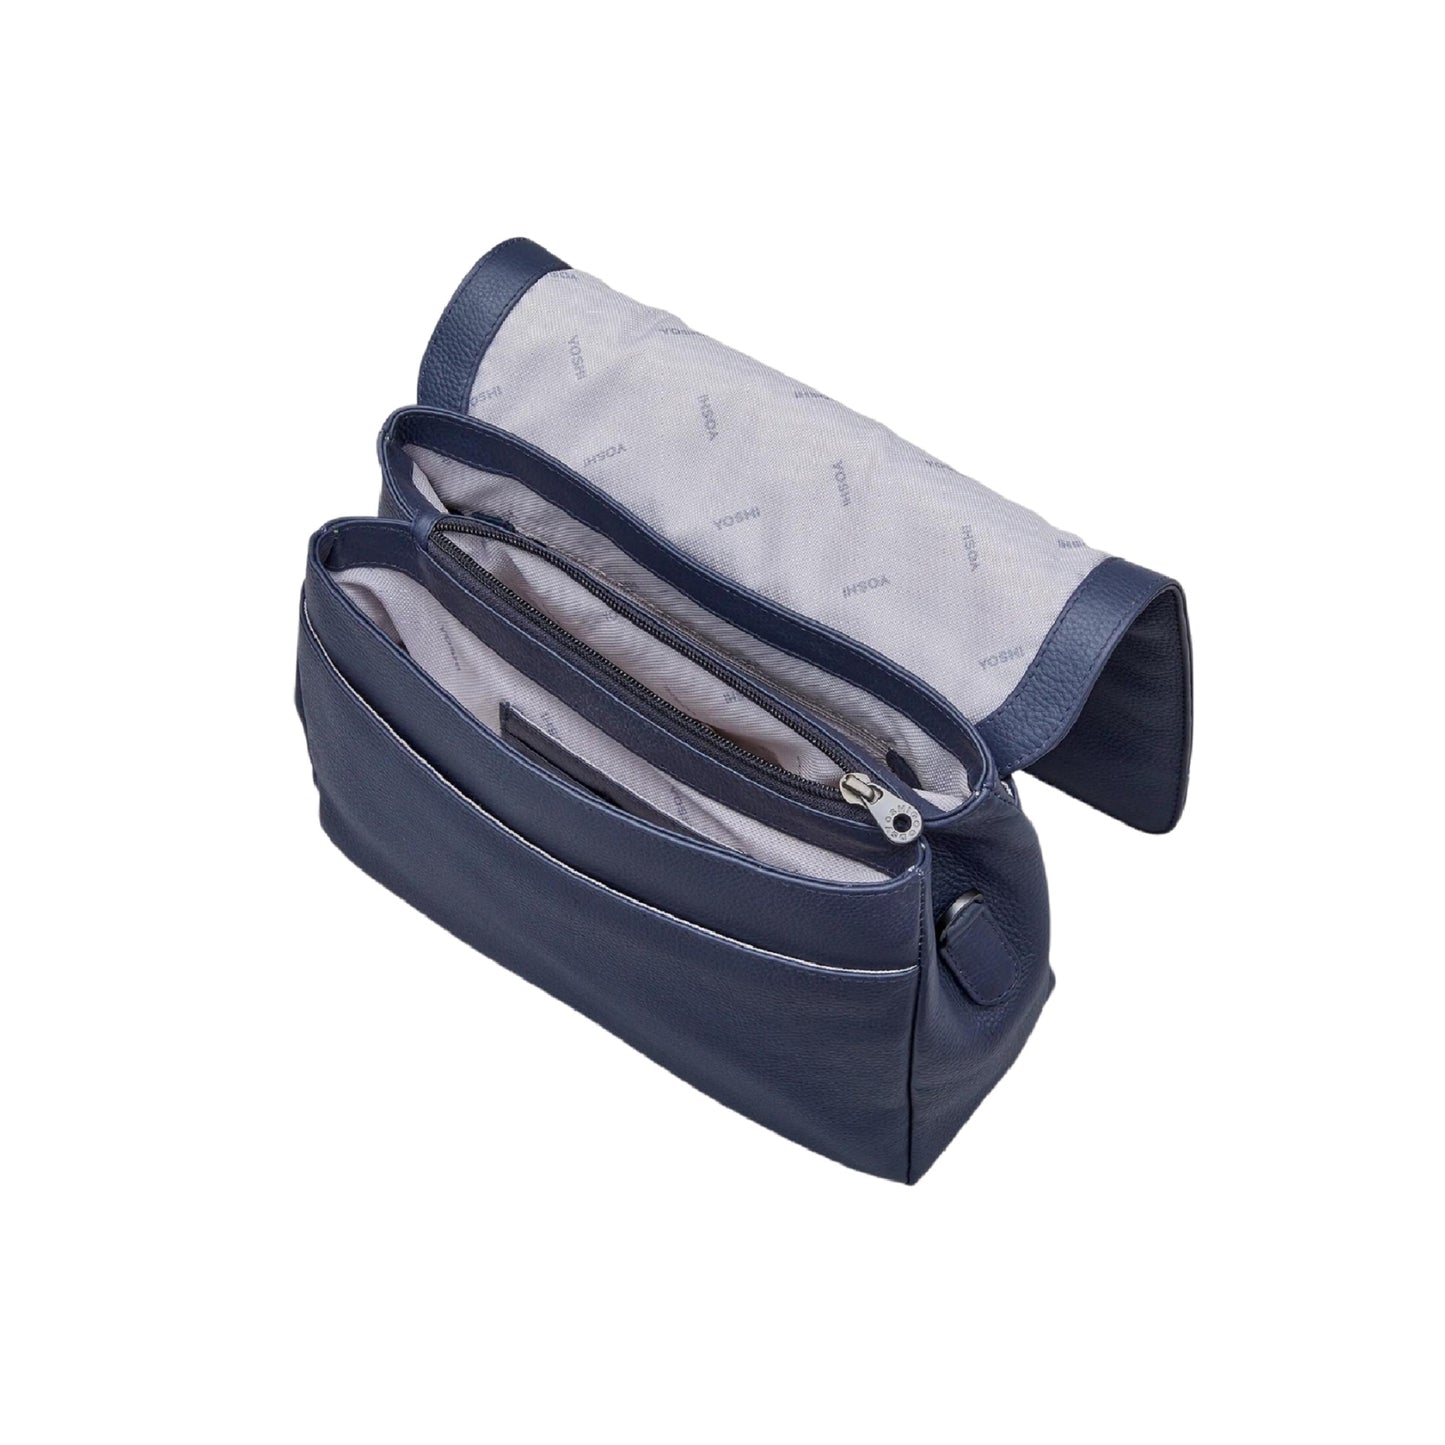 Bexley Flap over Leather Bag - Navy